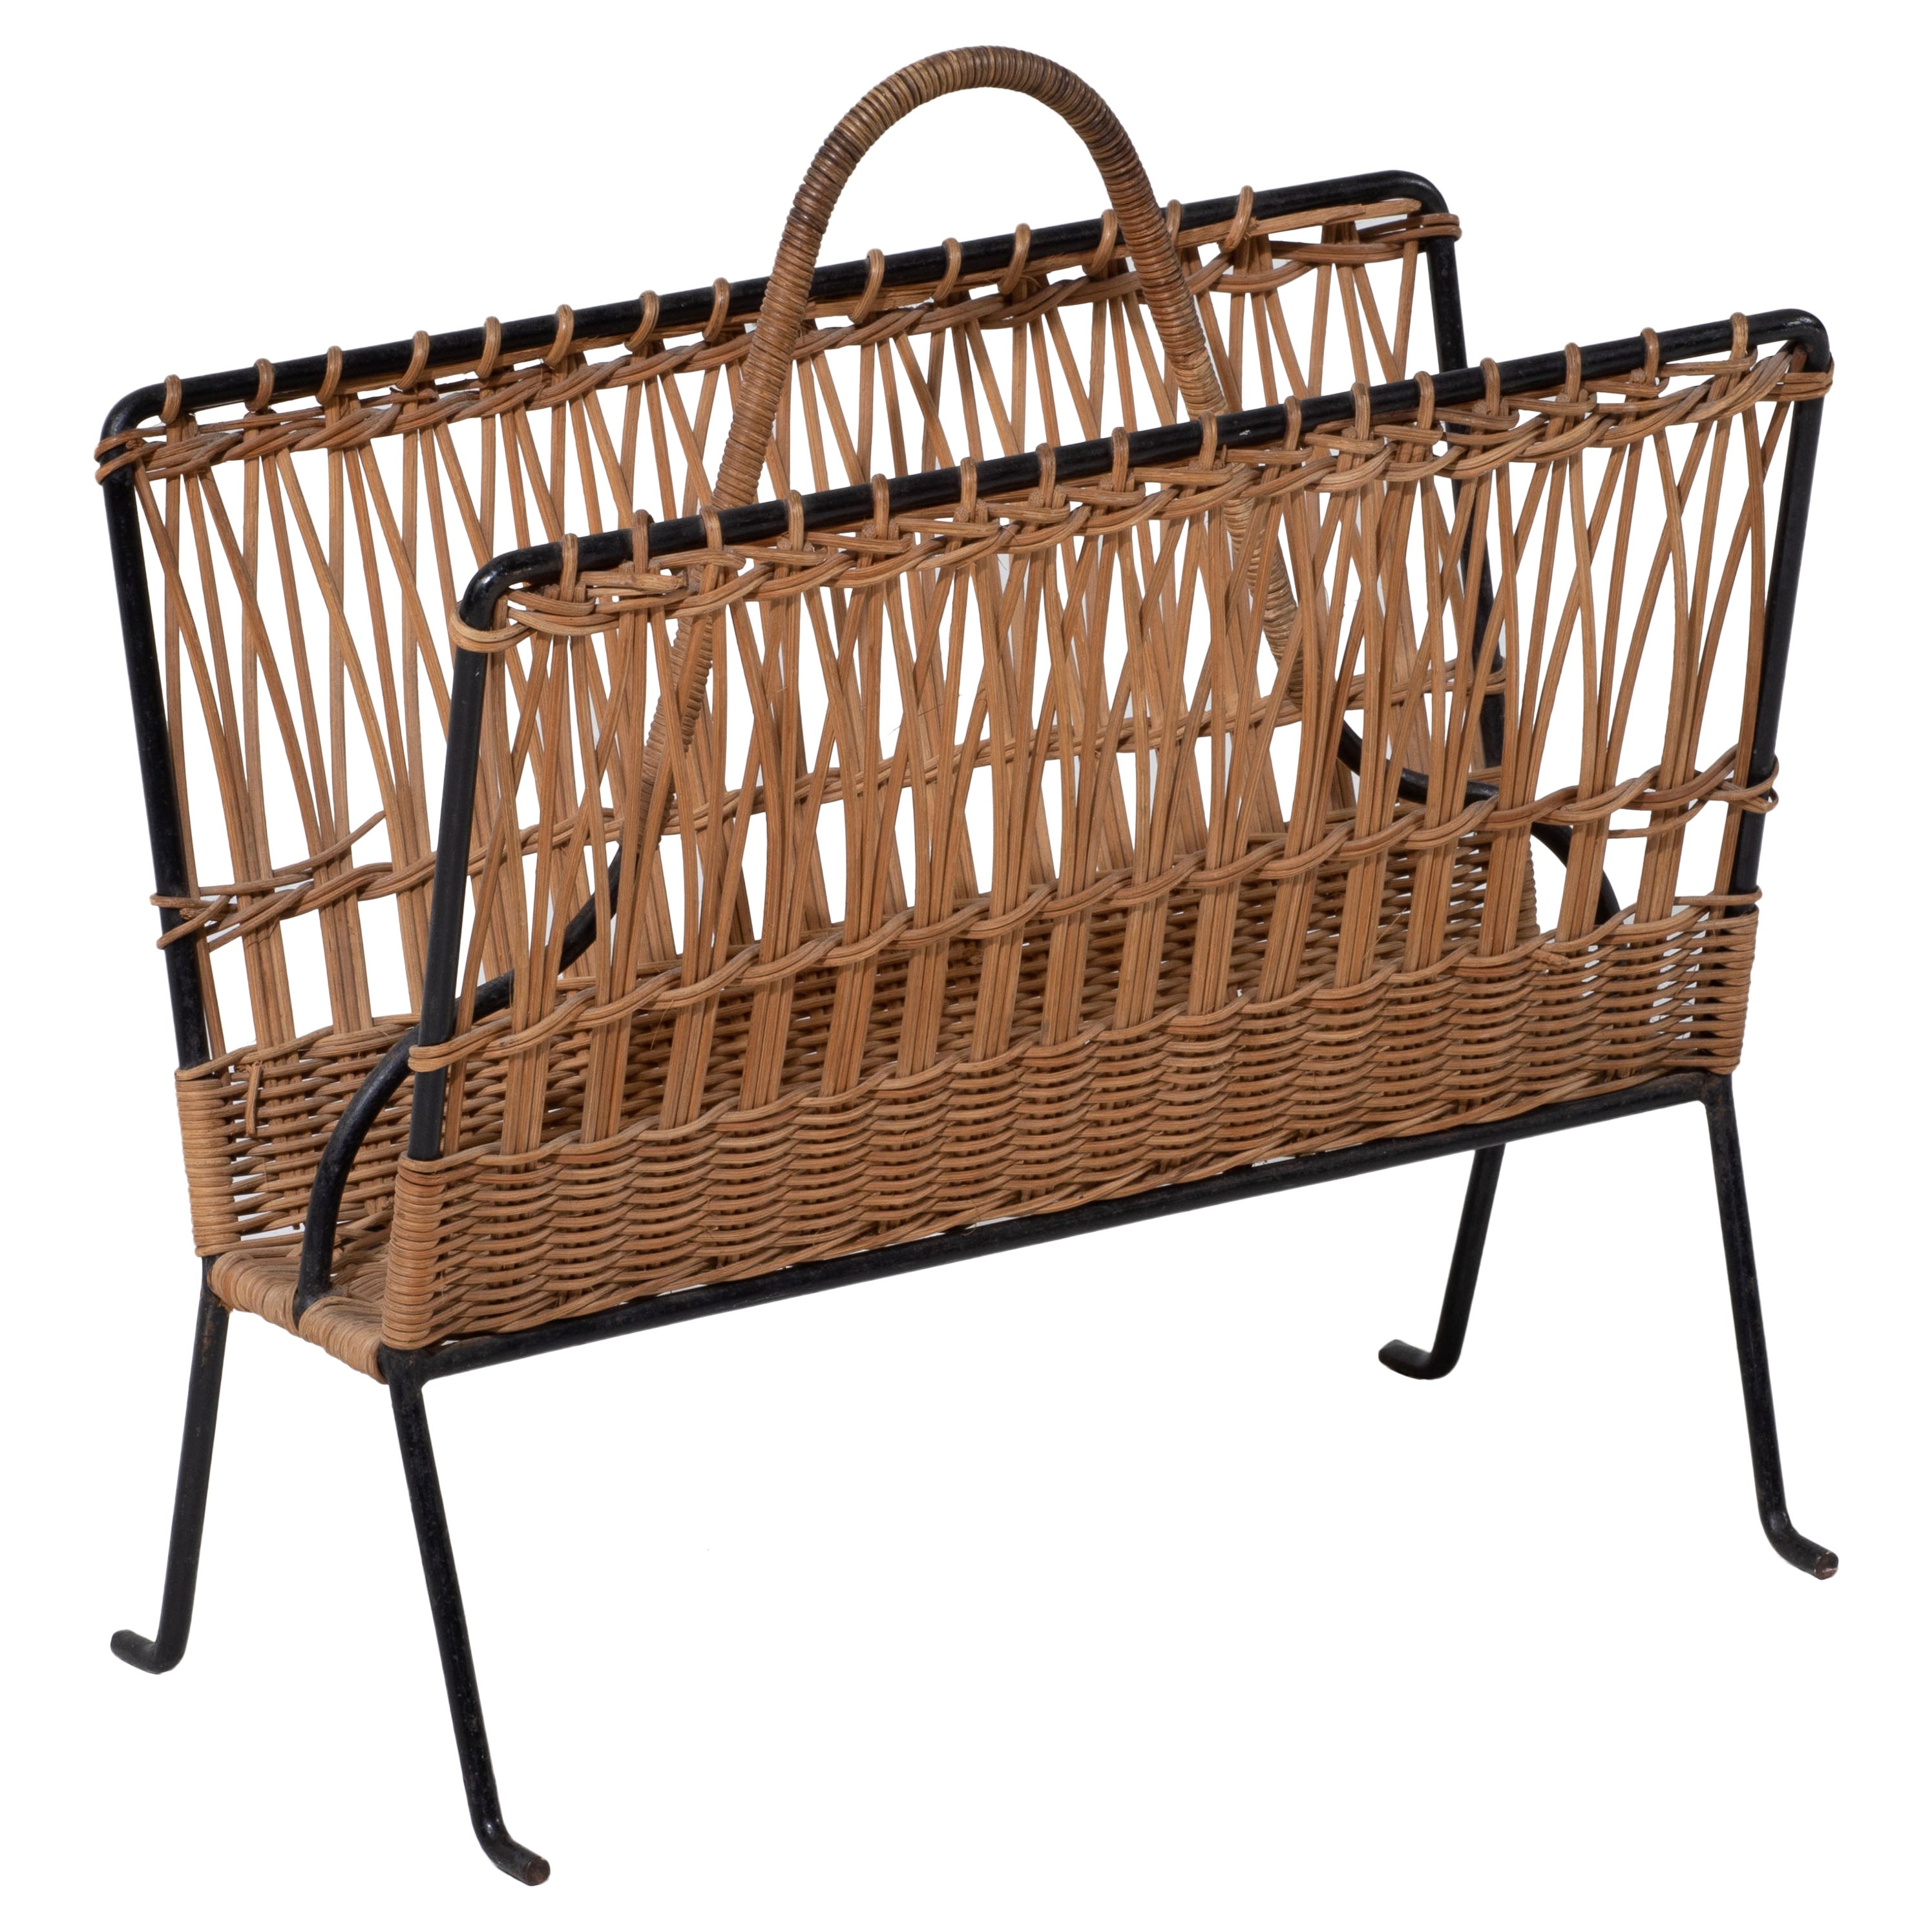 Jacques Adnet Wicker Magazine Rack with Black Iron Frame, Brass Ball Feet, 1950s For Sale